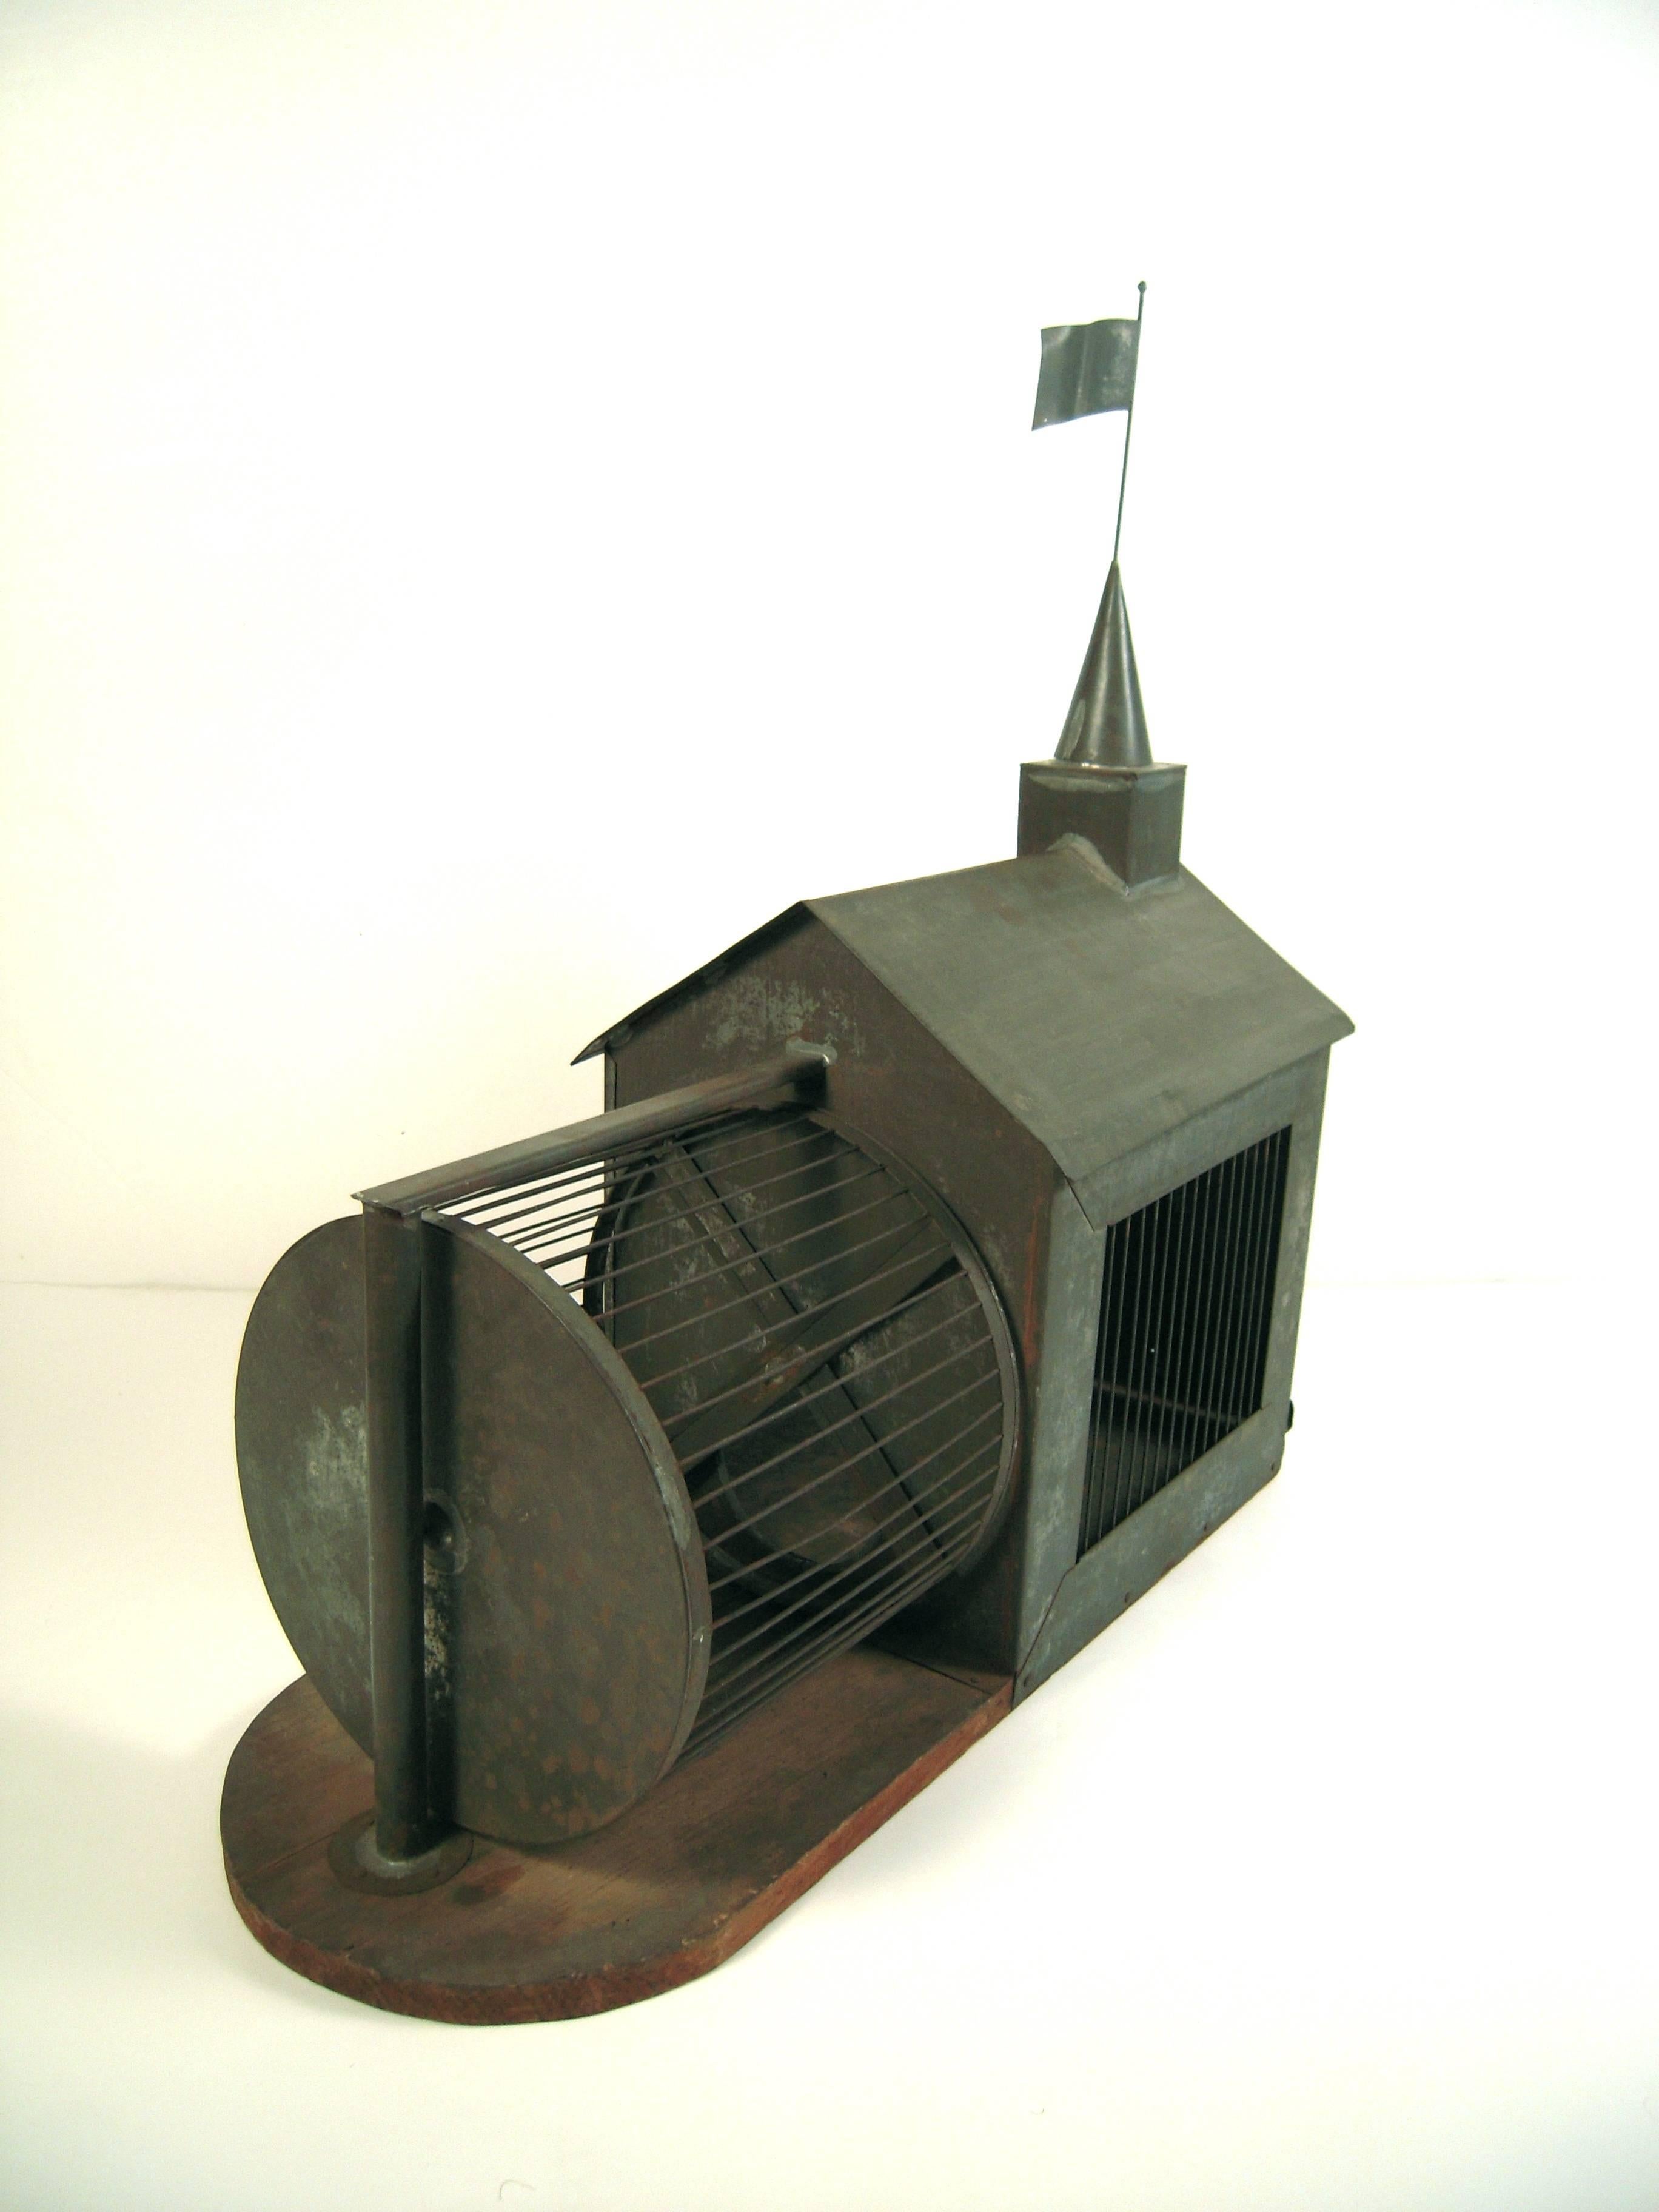 A rare, complete 19th century American Folk Art architectural squirrel cage, beautifully preserved, in tin in the form of a meeting house with conical tower and flag waving in the wind, mounted on a wooden base. The squirrel cage has a sliding door,